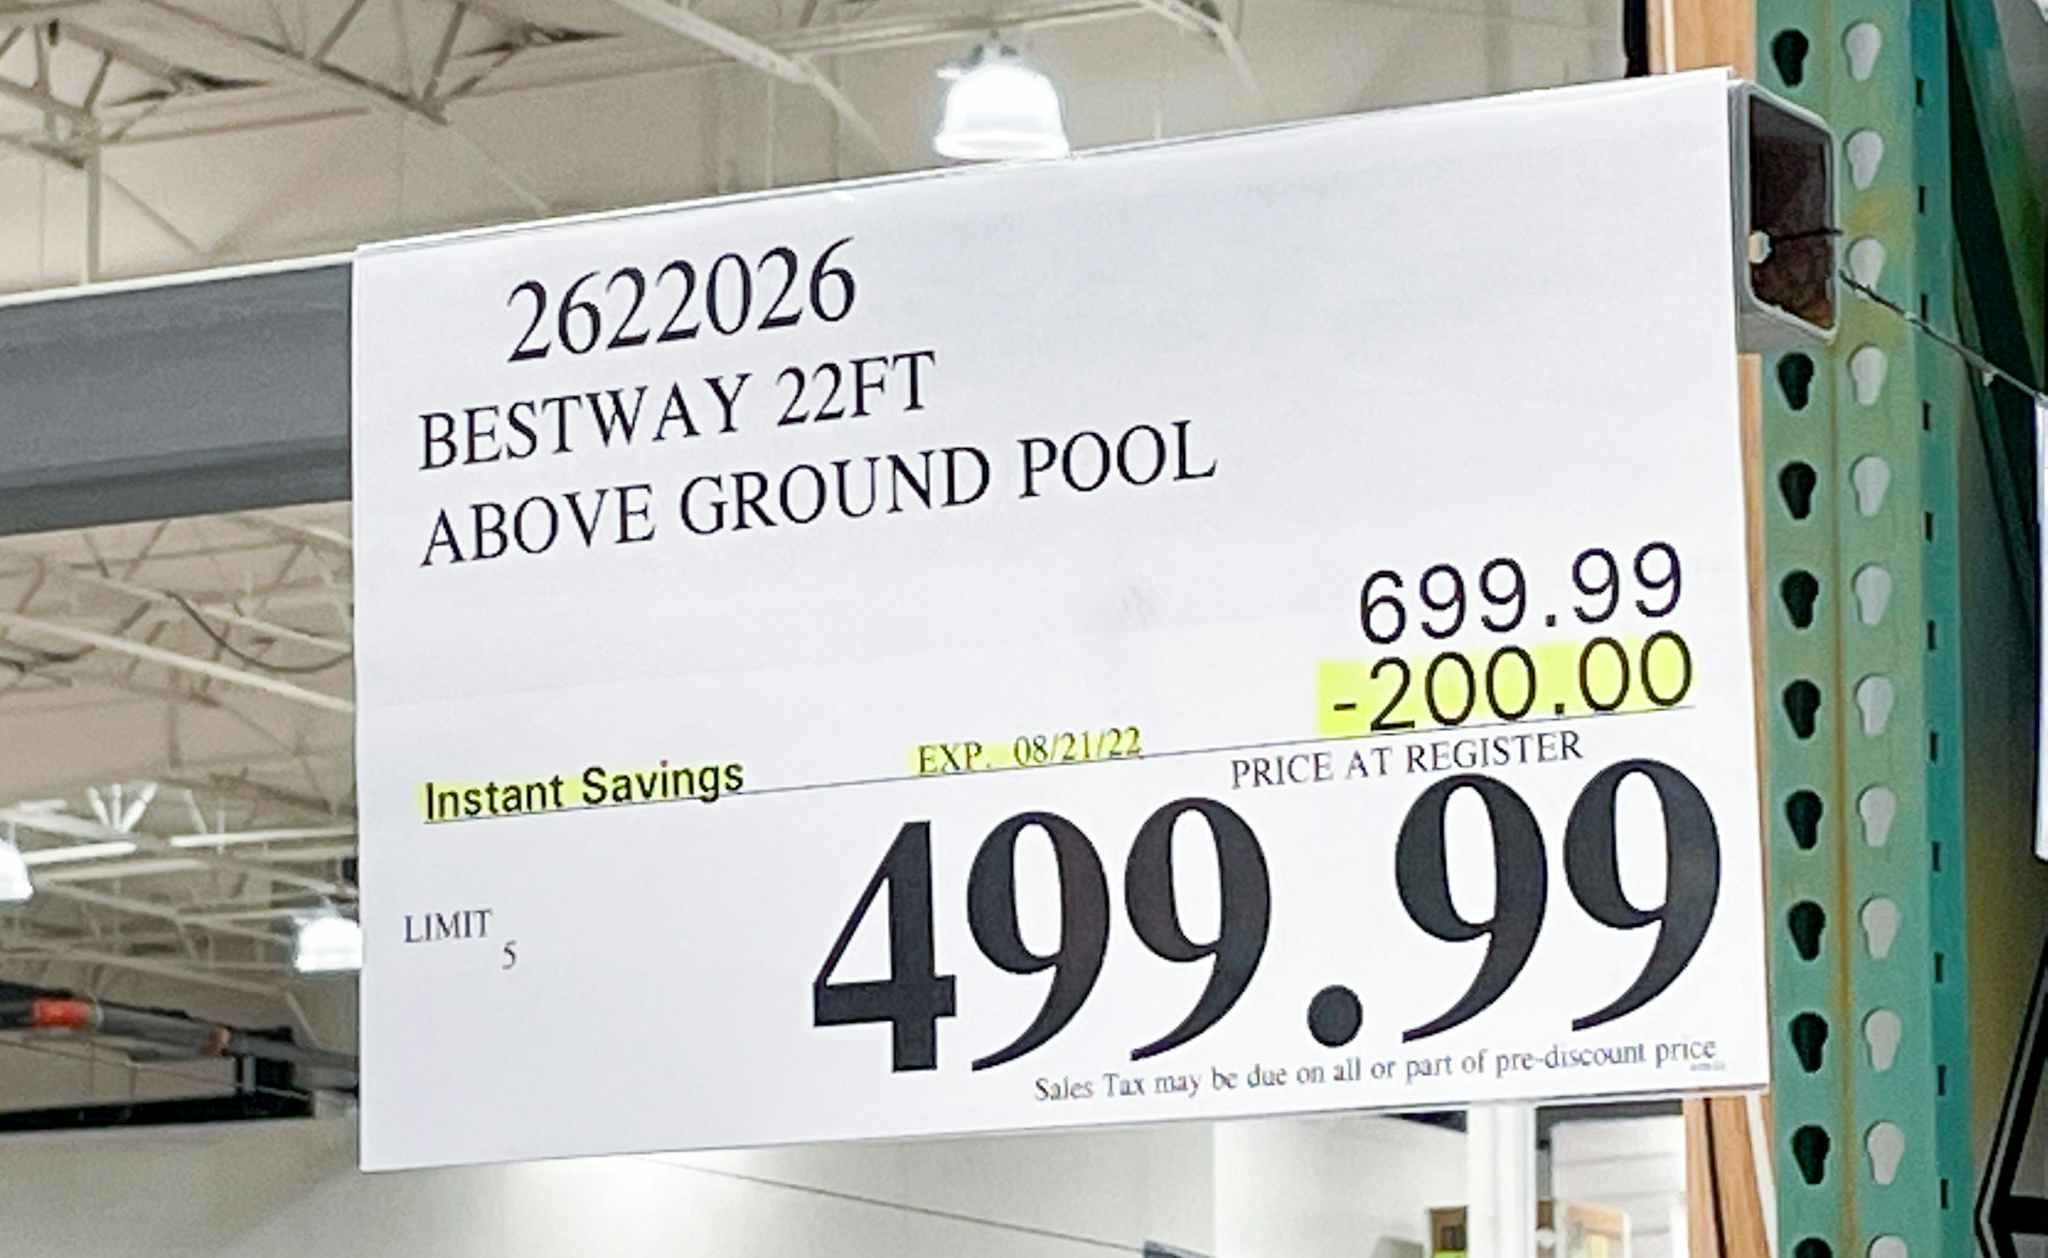 sales sign for a pool at costco